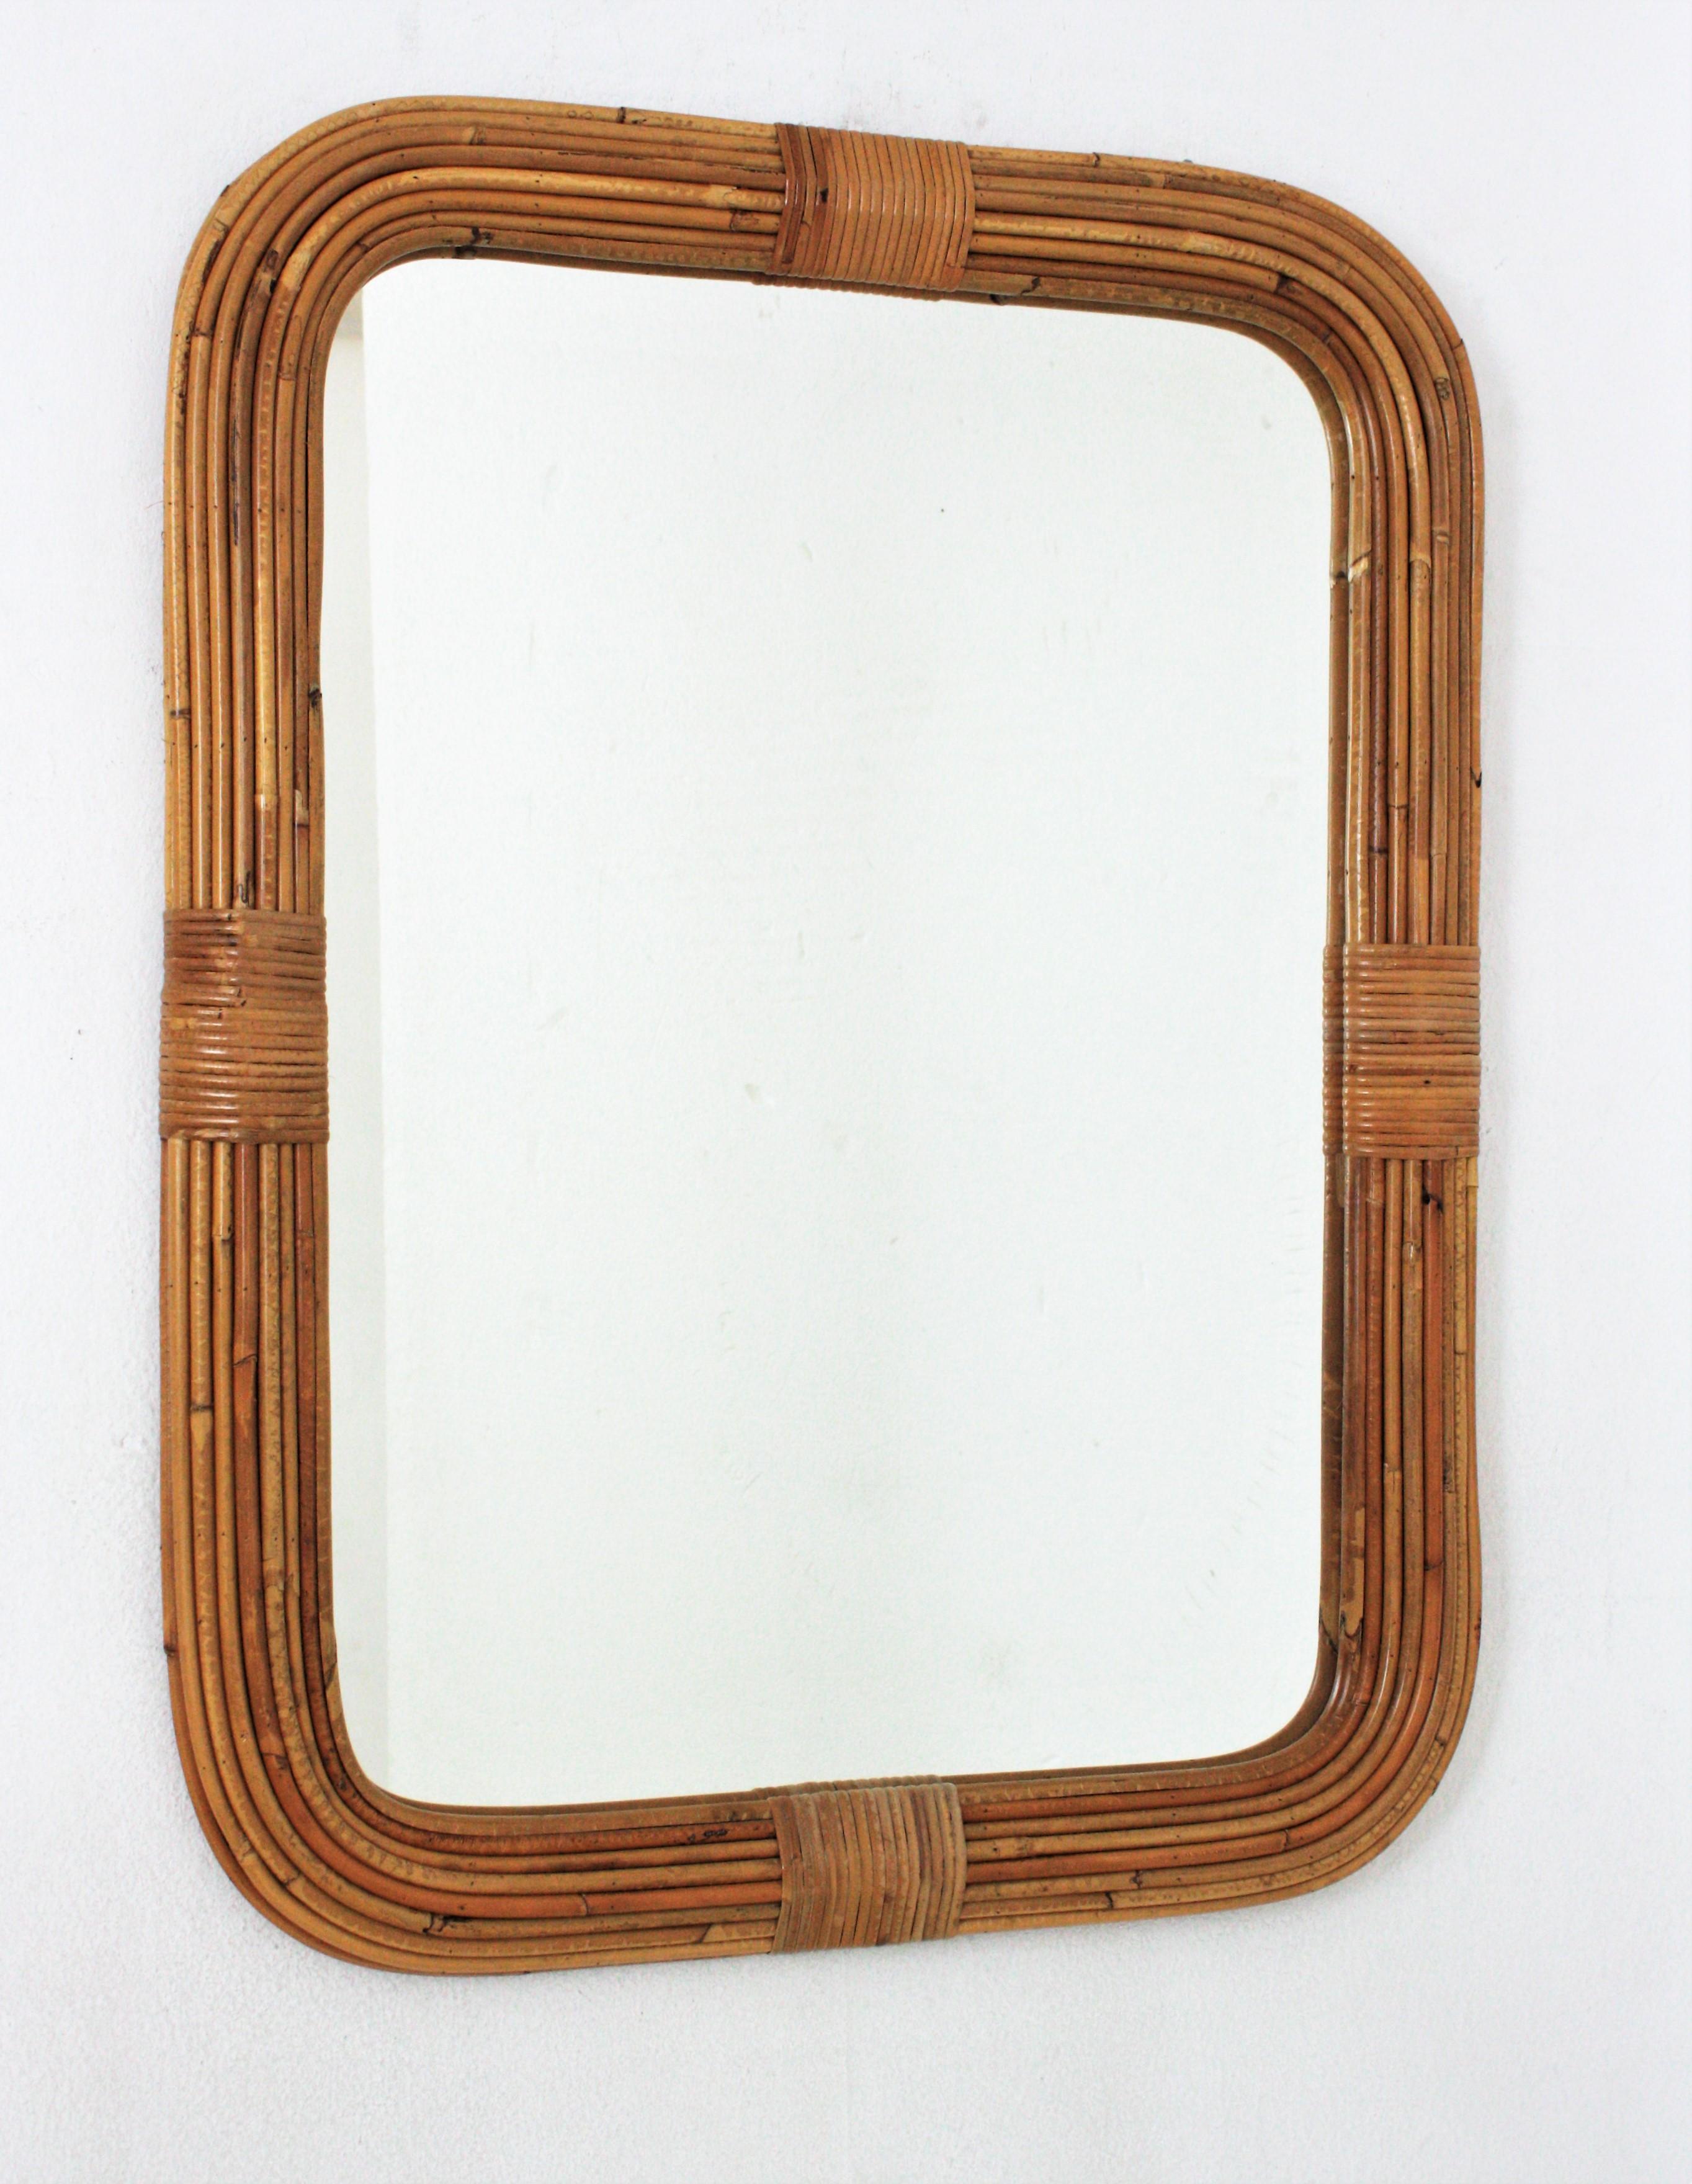 Eye-caching Organic Modern handcrafted in rattan. Attributed to Vivai del Sud. Italy, 1960s.
This mirror features a finely executed rectngular frame made of 9 layers of rattan canes. It has wicker tied details on each side.
To be used as wall